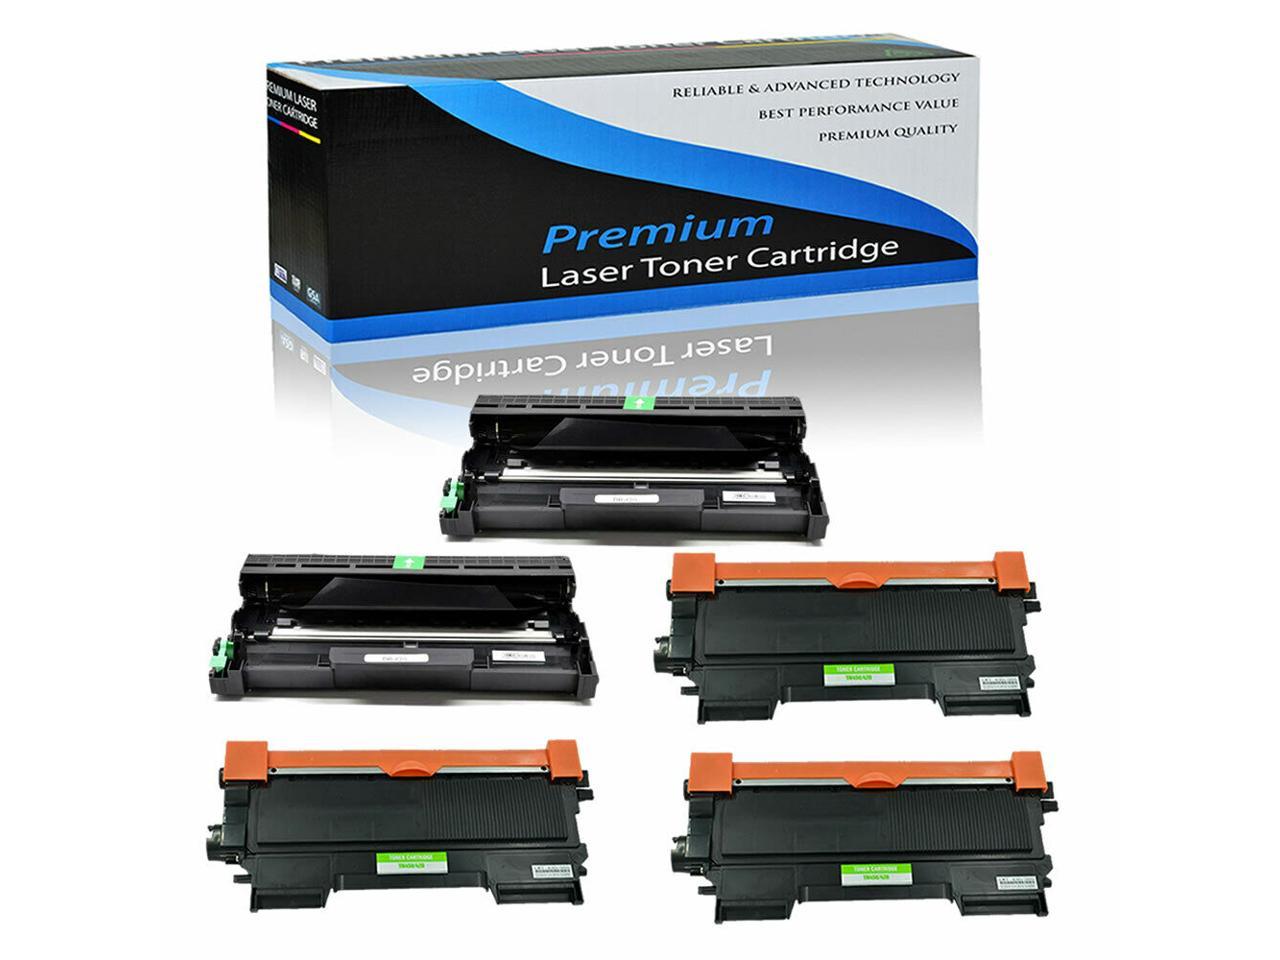 3PK TN450 Toner For Brother HL-2240 2230 2242D MFC-7360N 7365DN 7460DN 7860DW